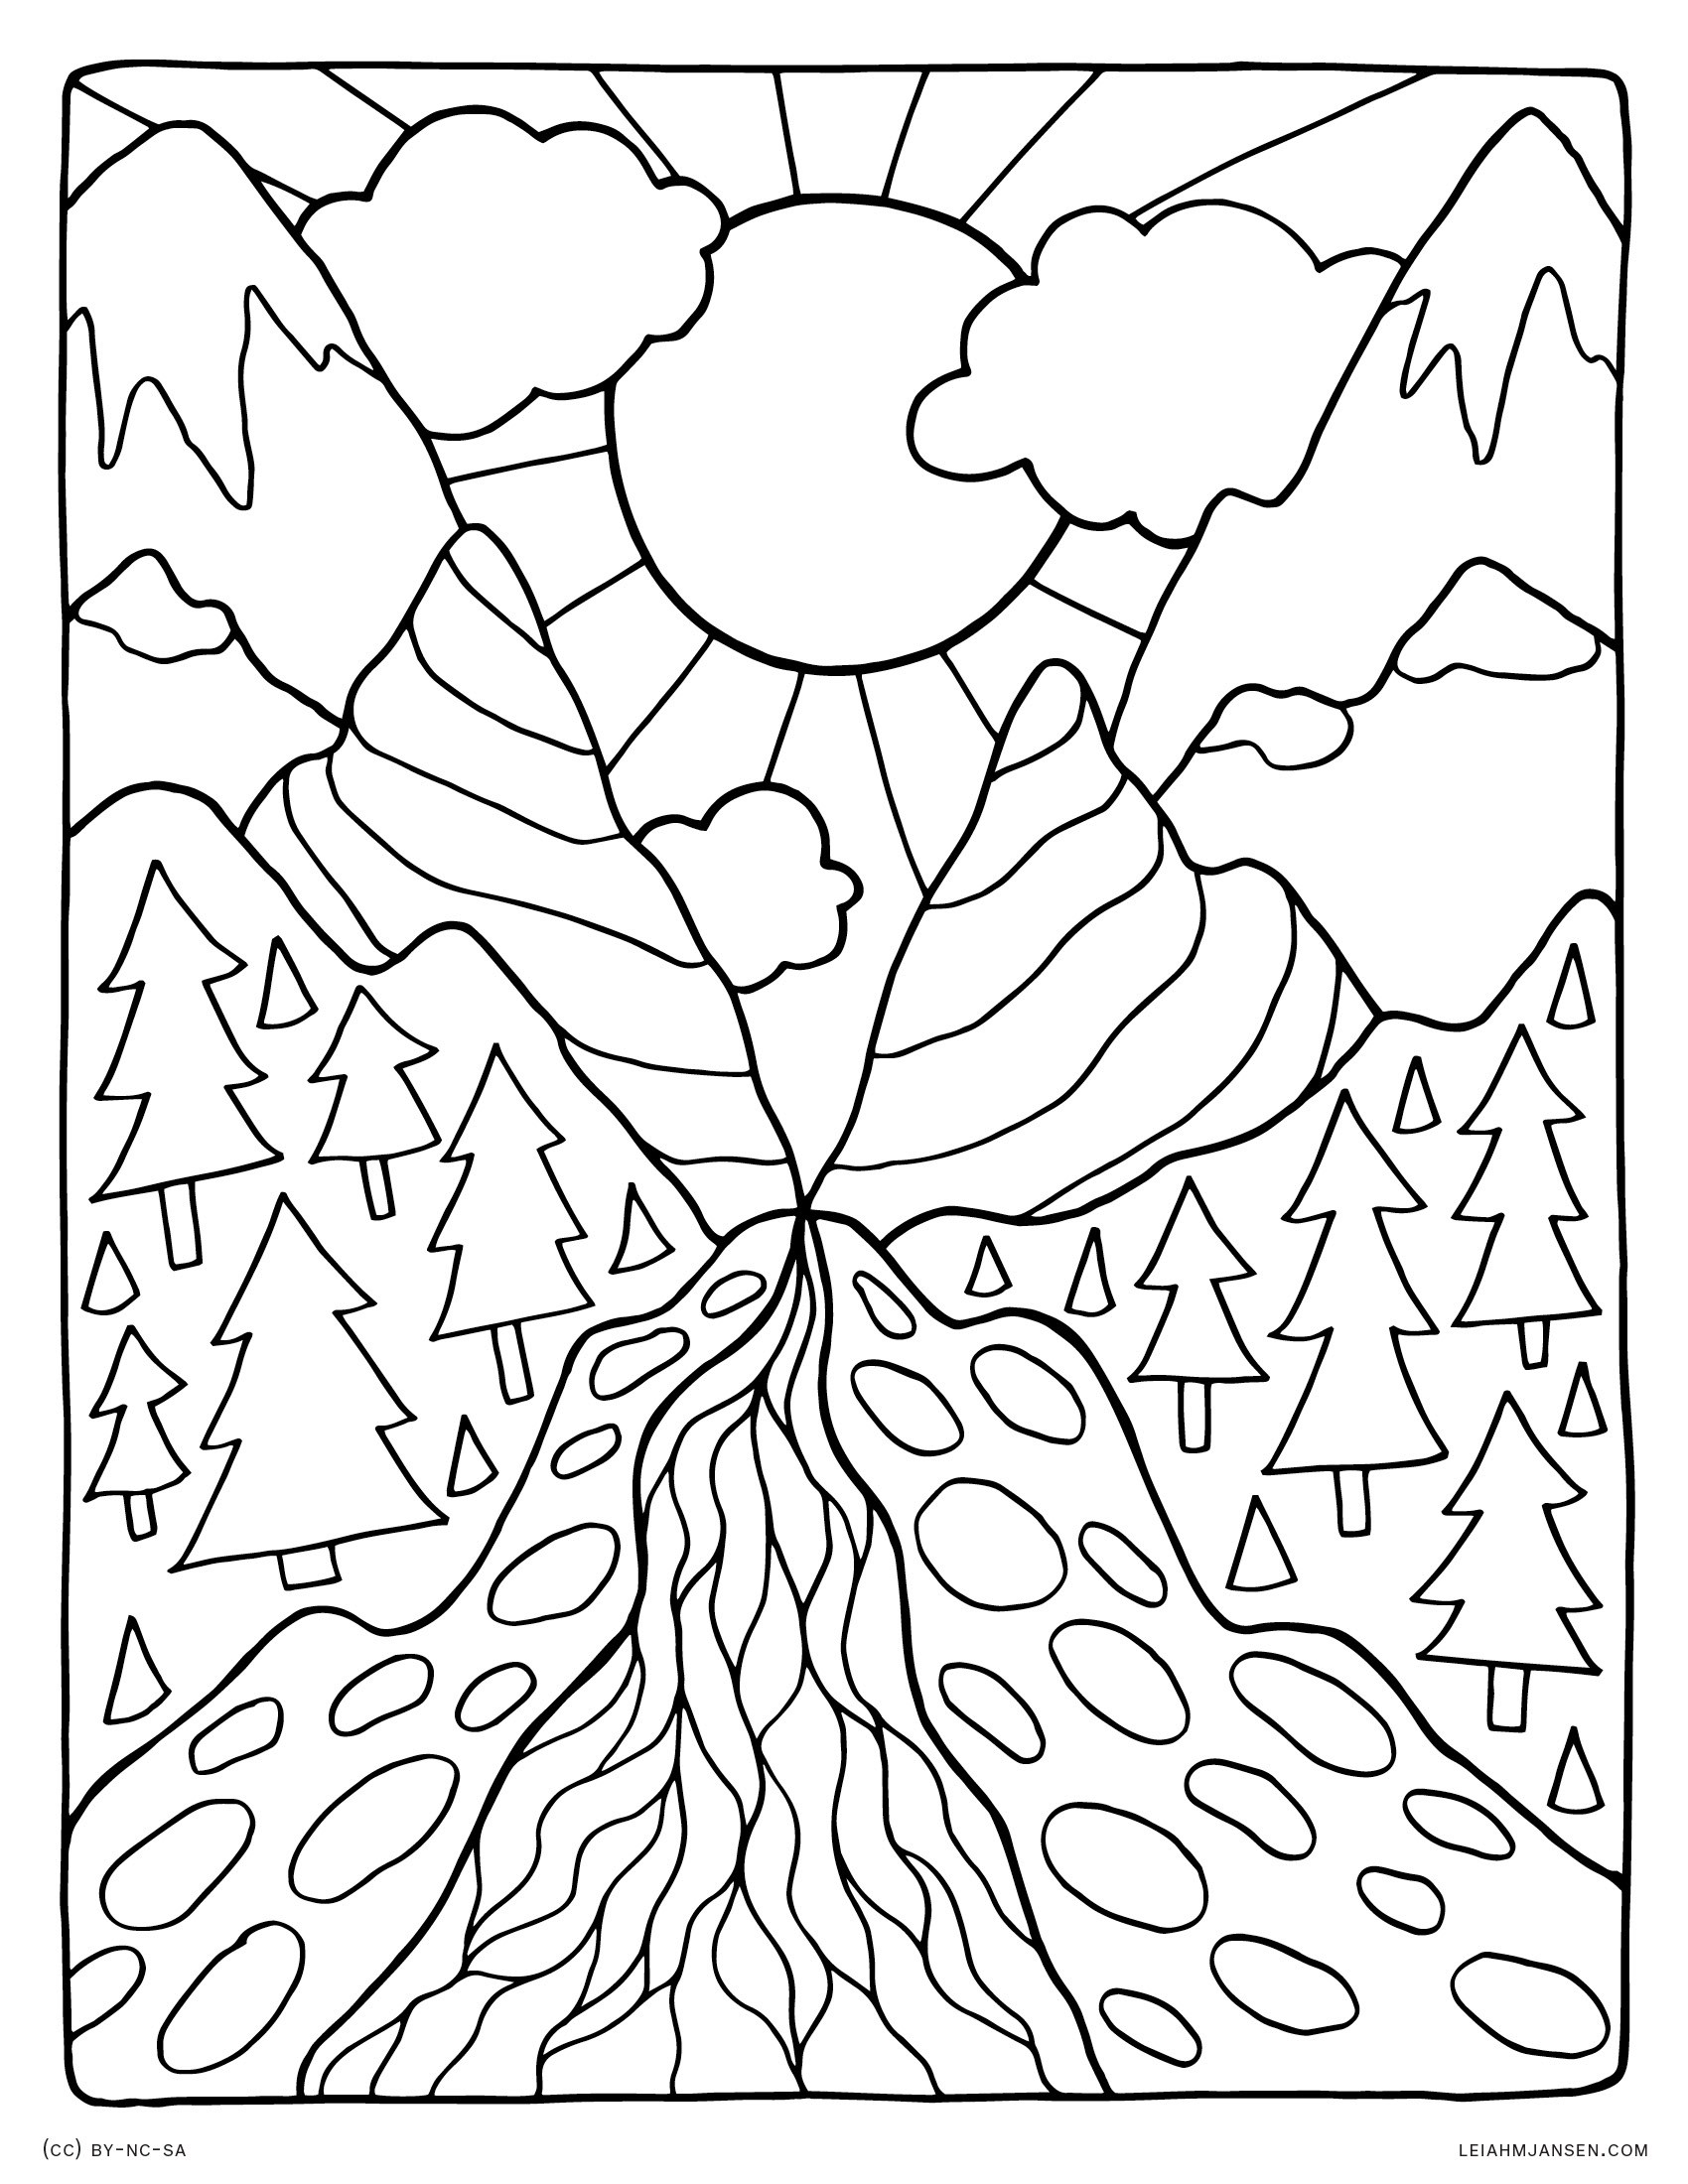 mountain-scene-drawing-at-getdrawings-free-download